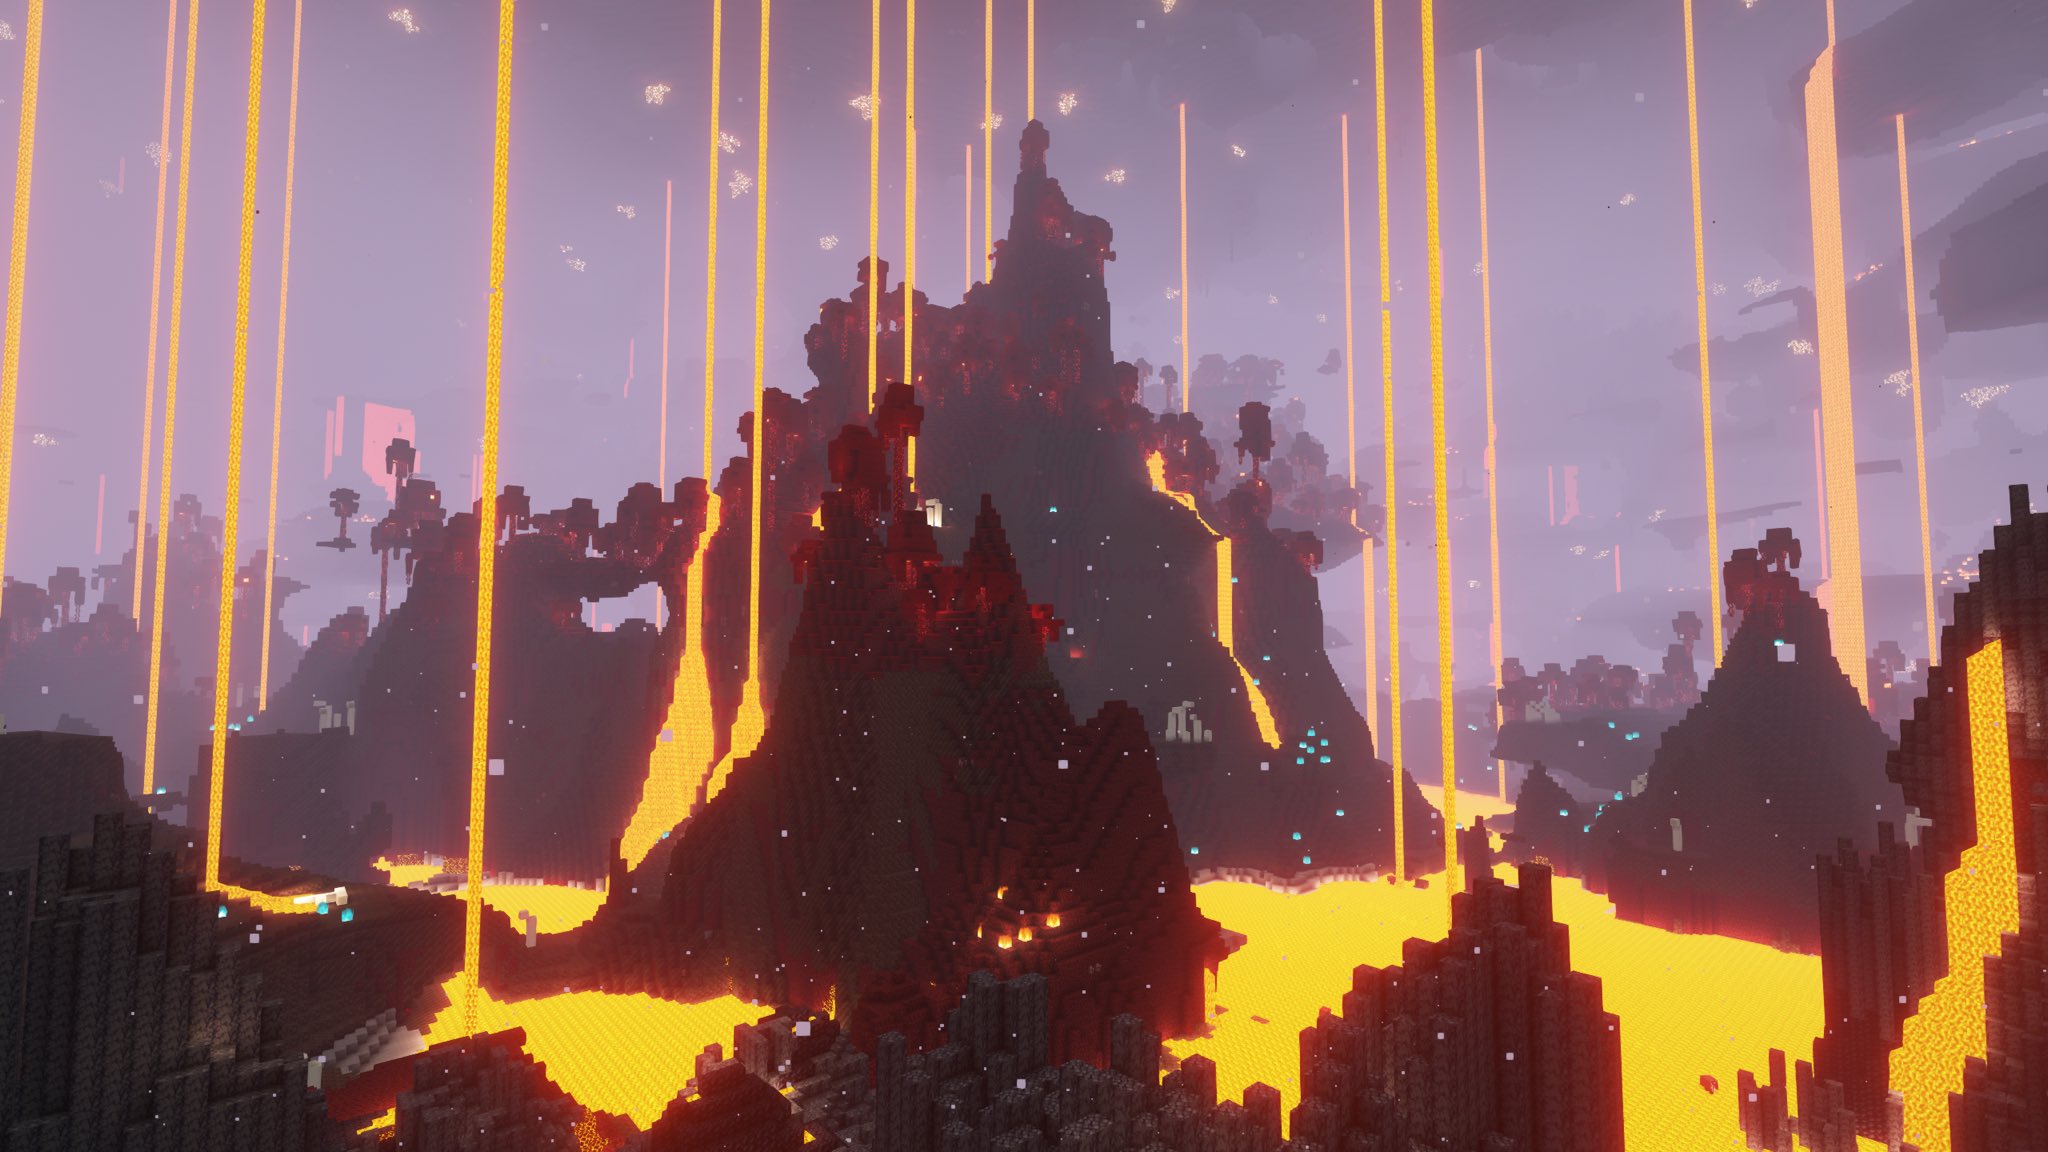 The Mountain: Into the Nether